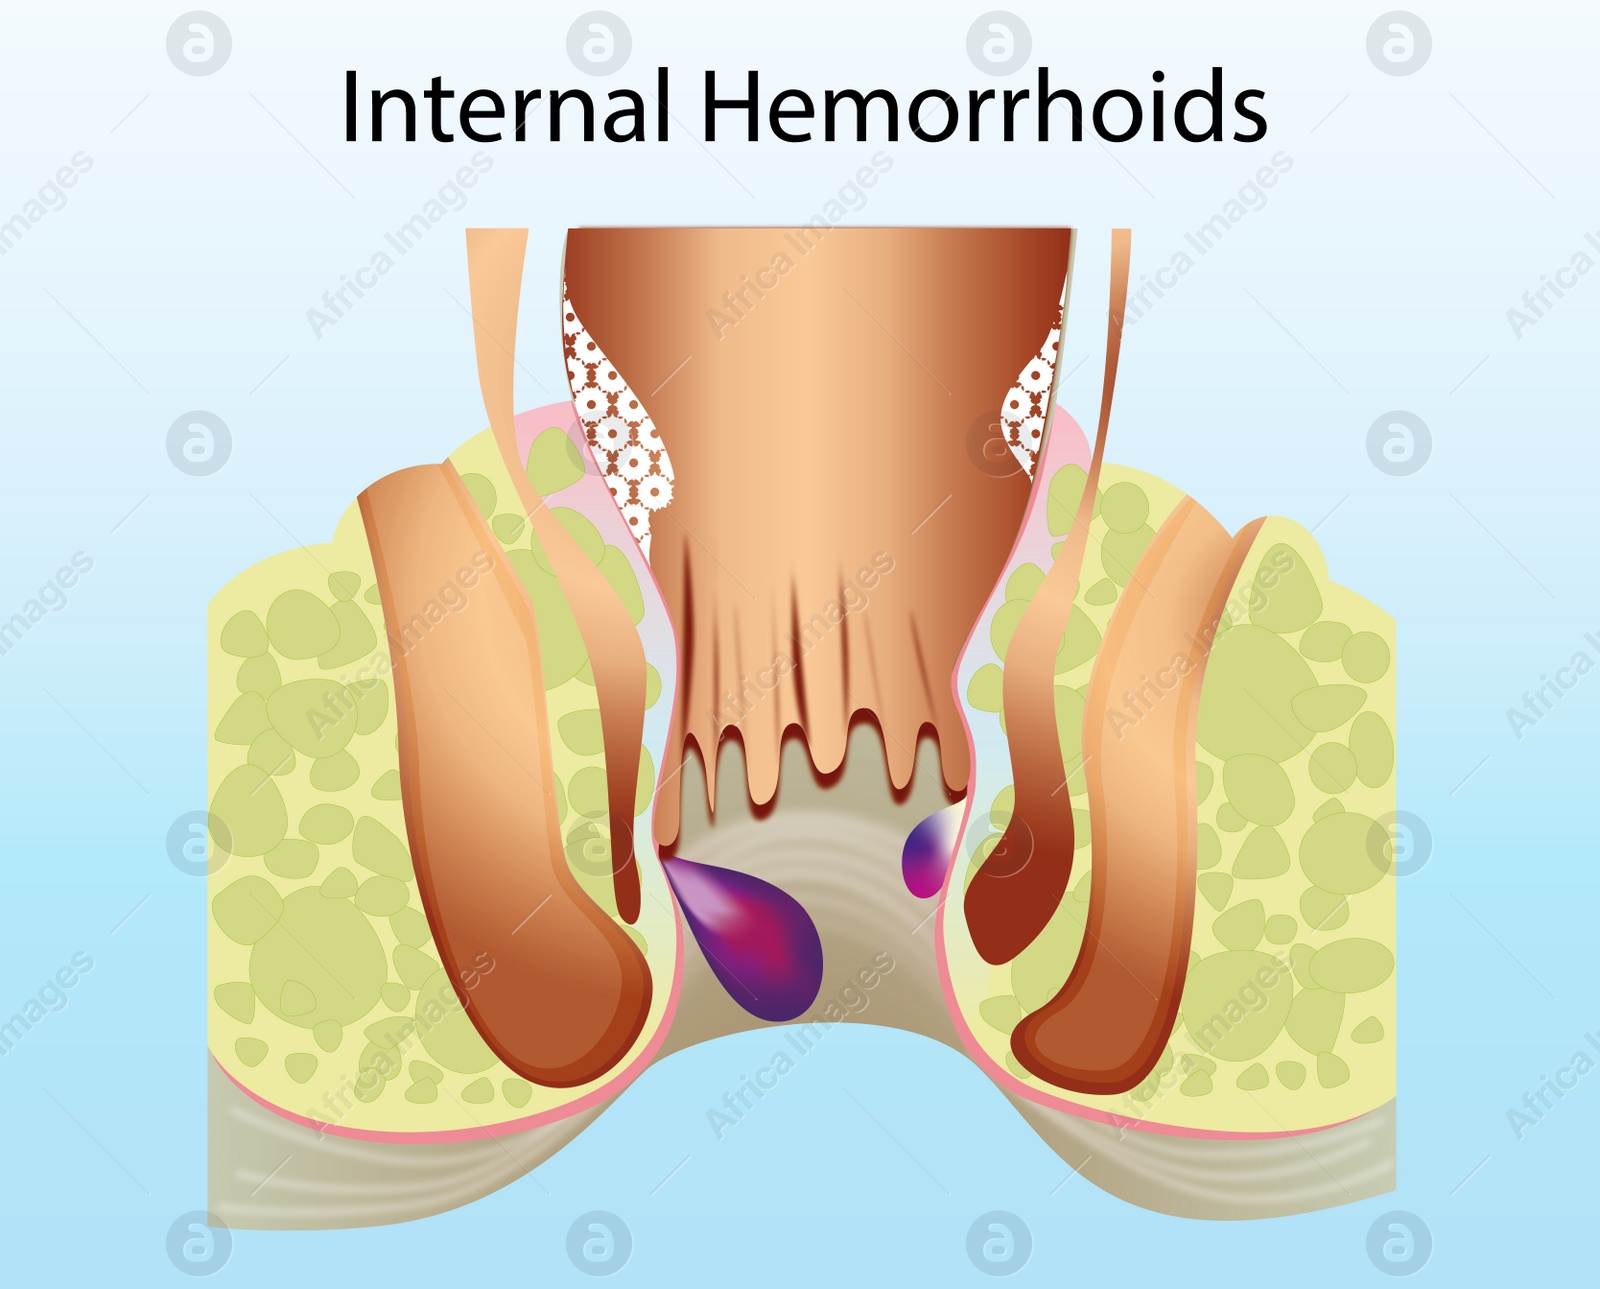 Image of Internal hemorrhoid. Unhealthy lower rectum with inflamed vascular structures, illustration